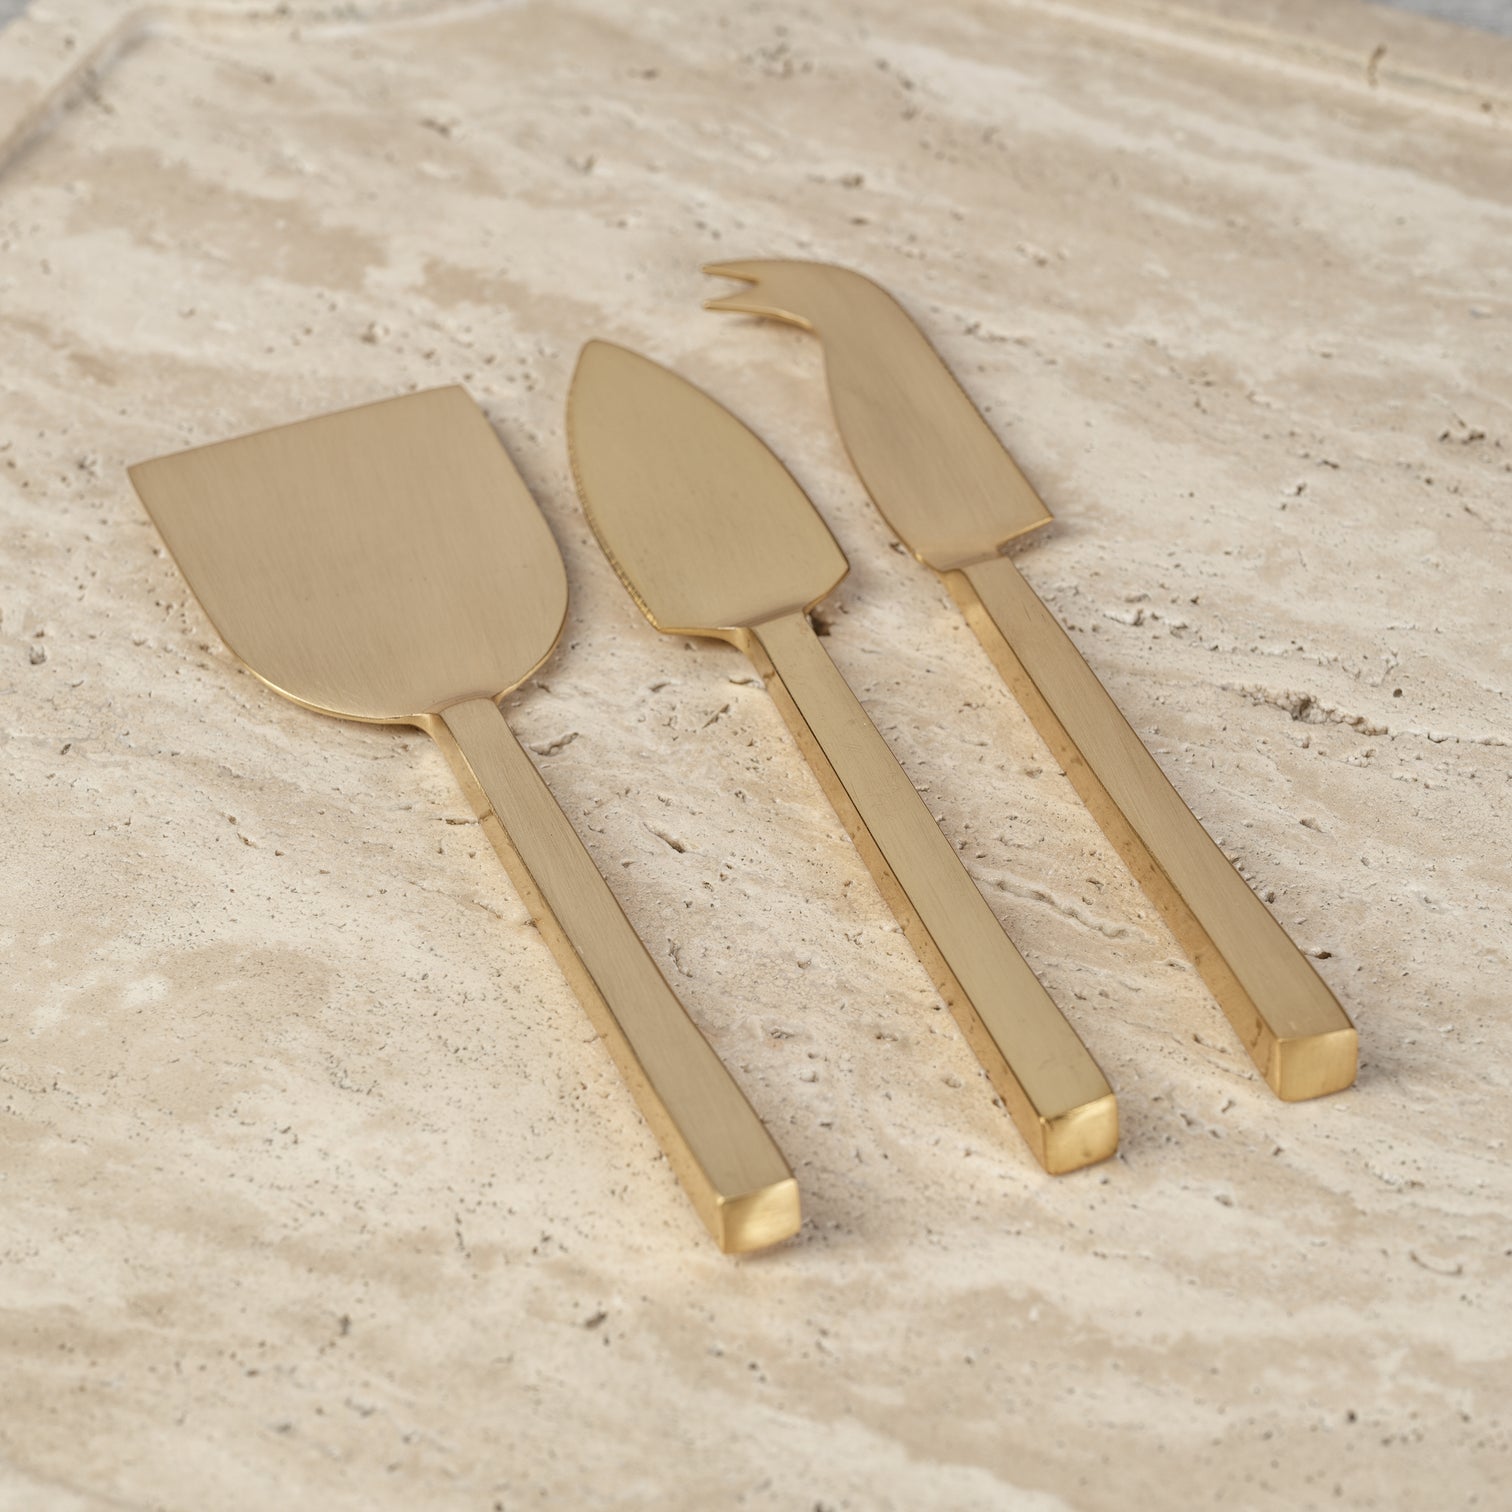 Cheese Slicer and Server Set - Gold